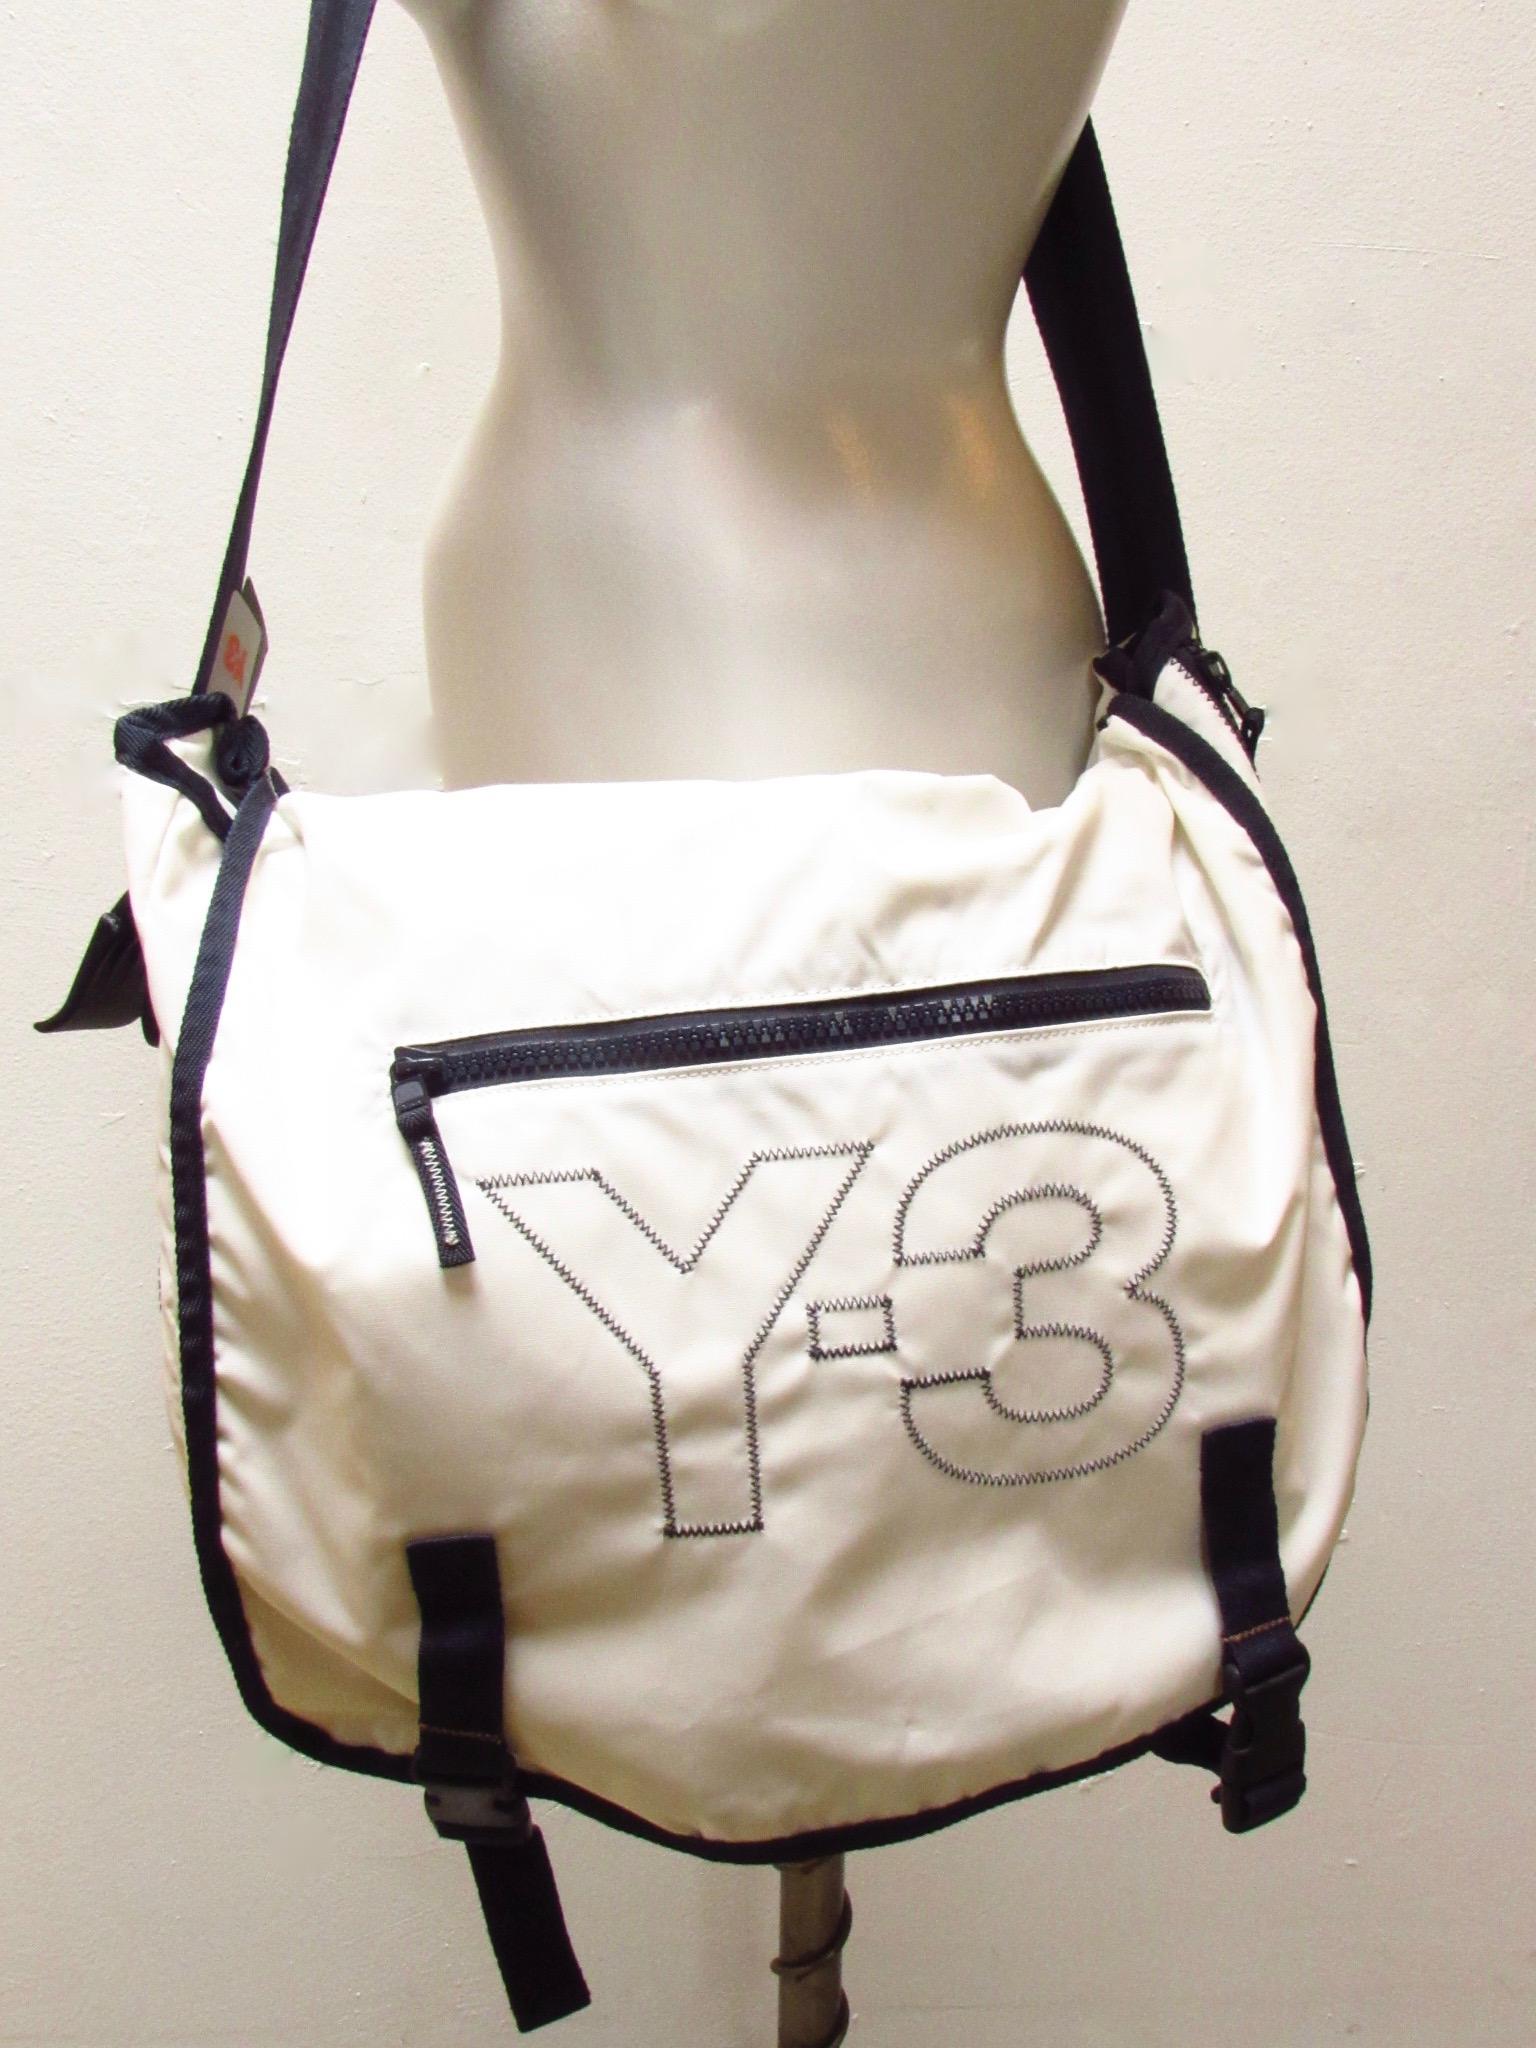 Dinstinctively nautical white and navy blue nylon messenger bag from Y-3 Yohji Yamamoto is lightweight and durable. It boasts an outer flap, with a zippered pocket, that secures with clips. Inside there are multiple slots for organizing contents.